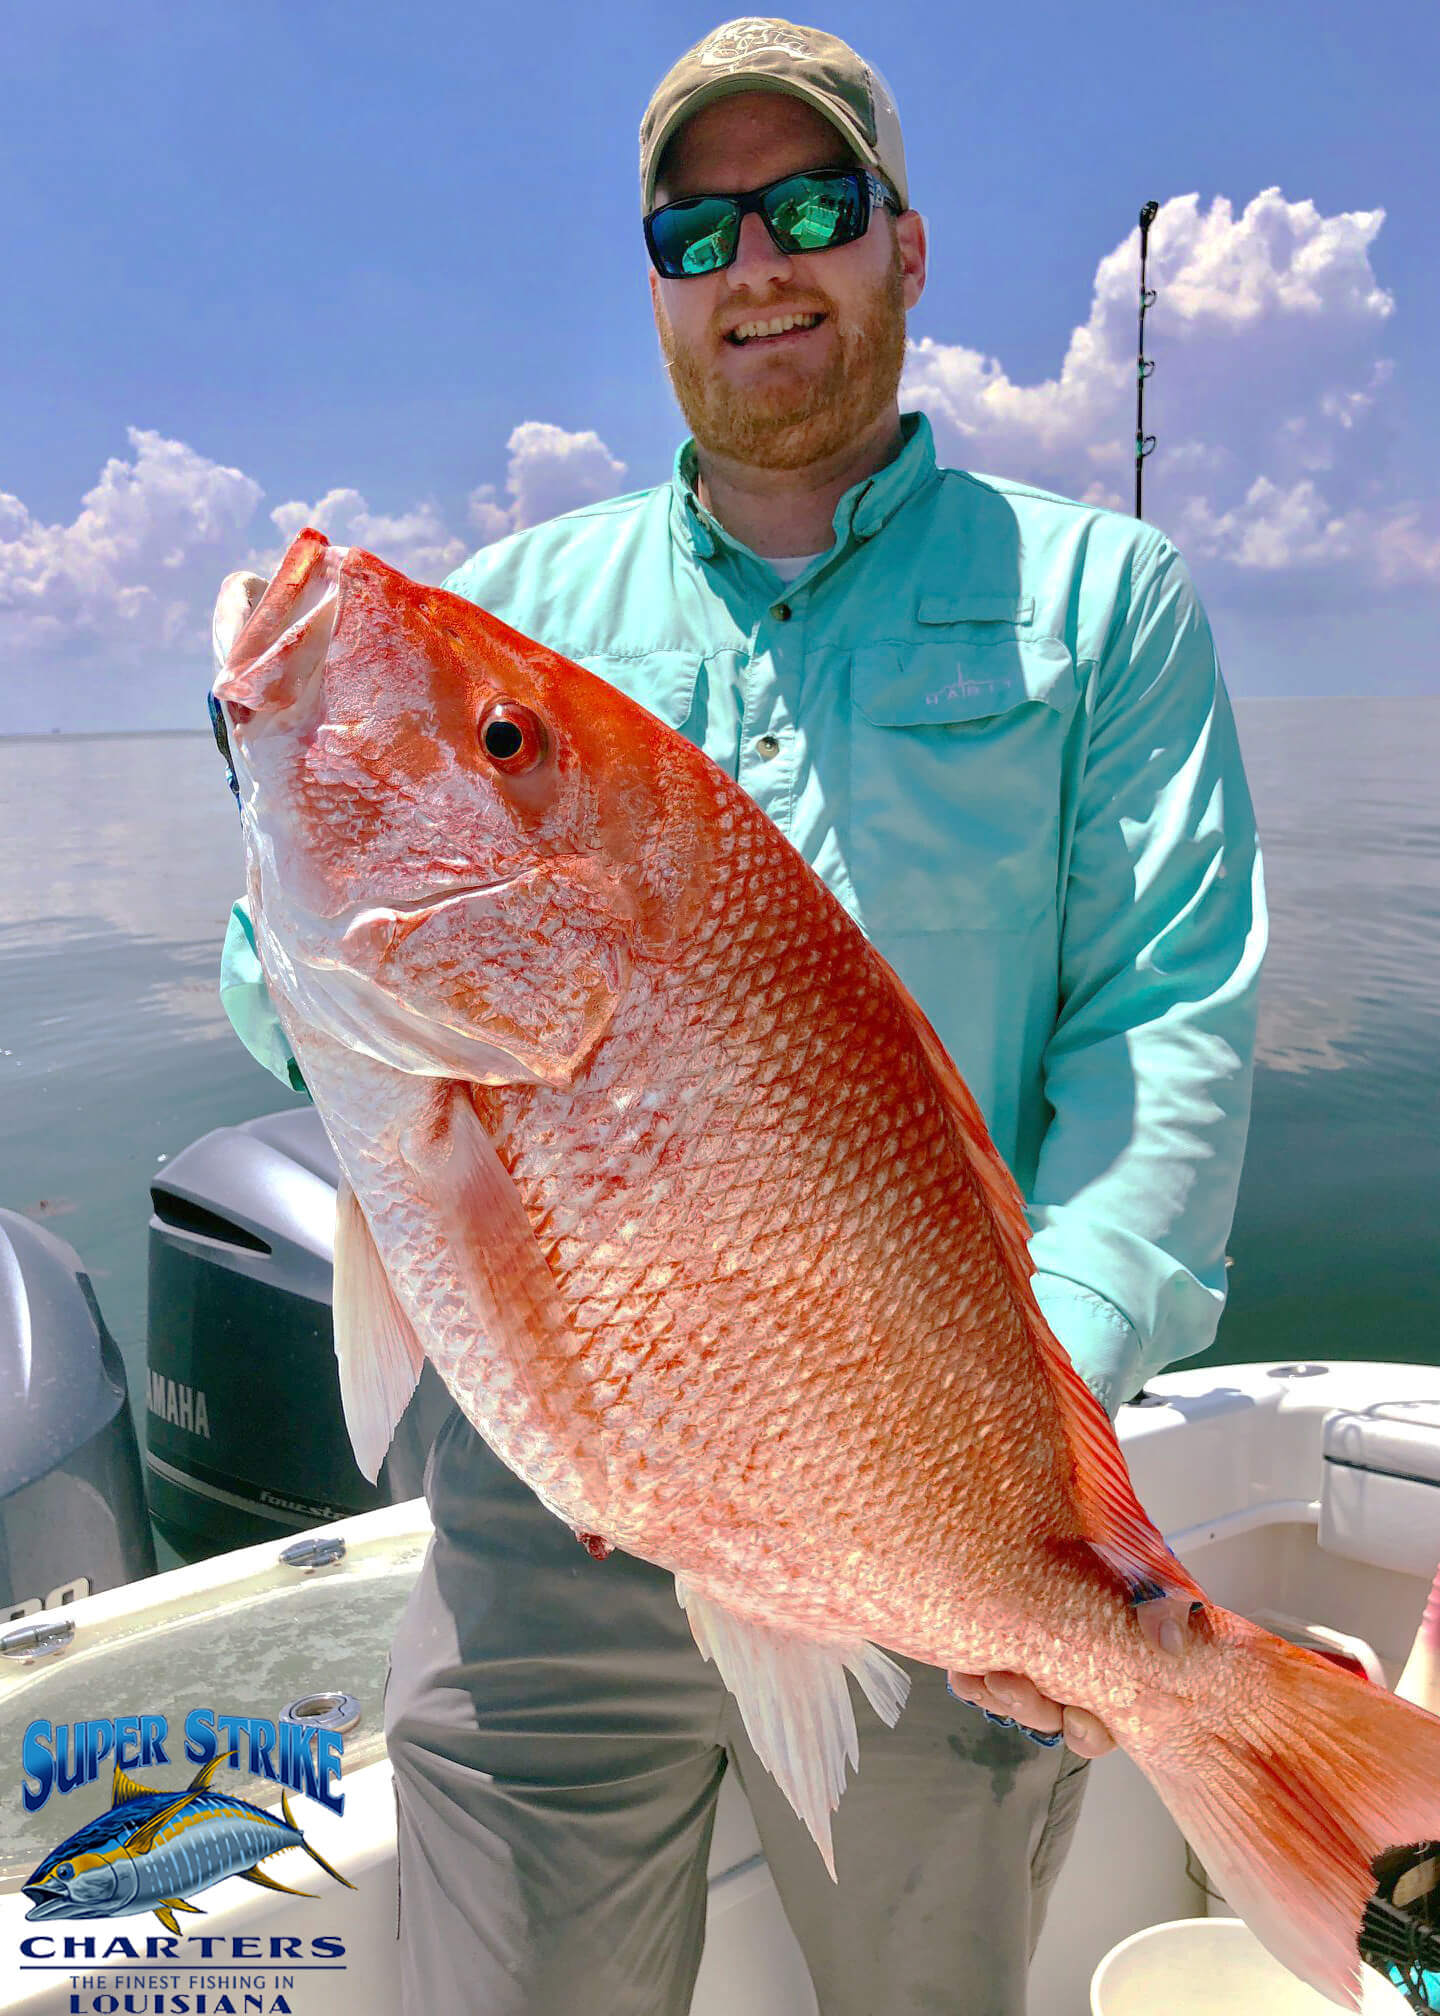 Red snapper fishing charter